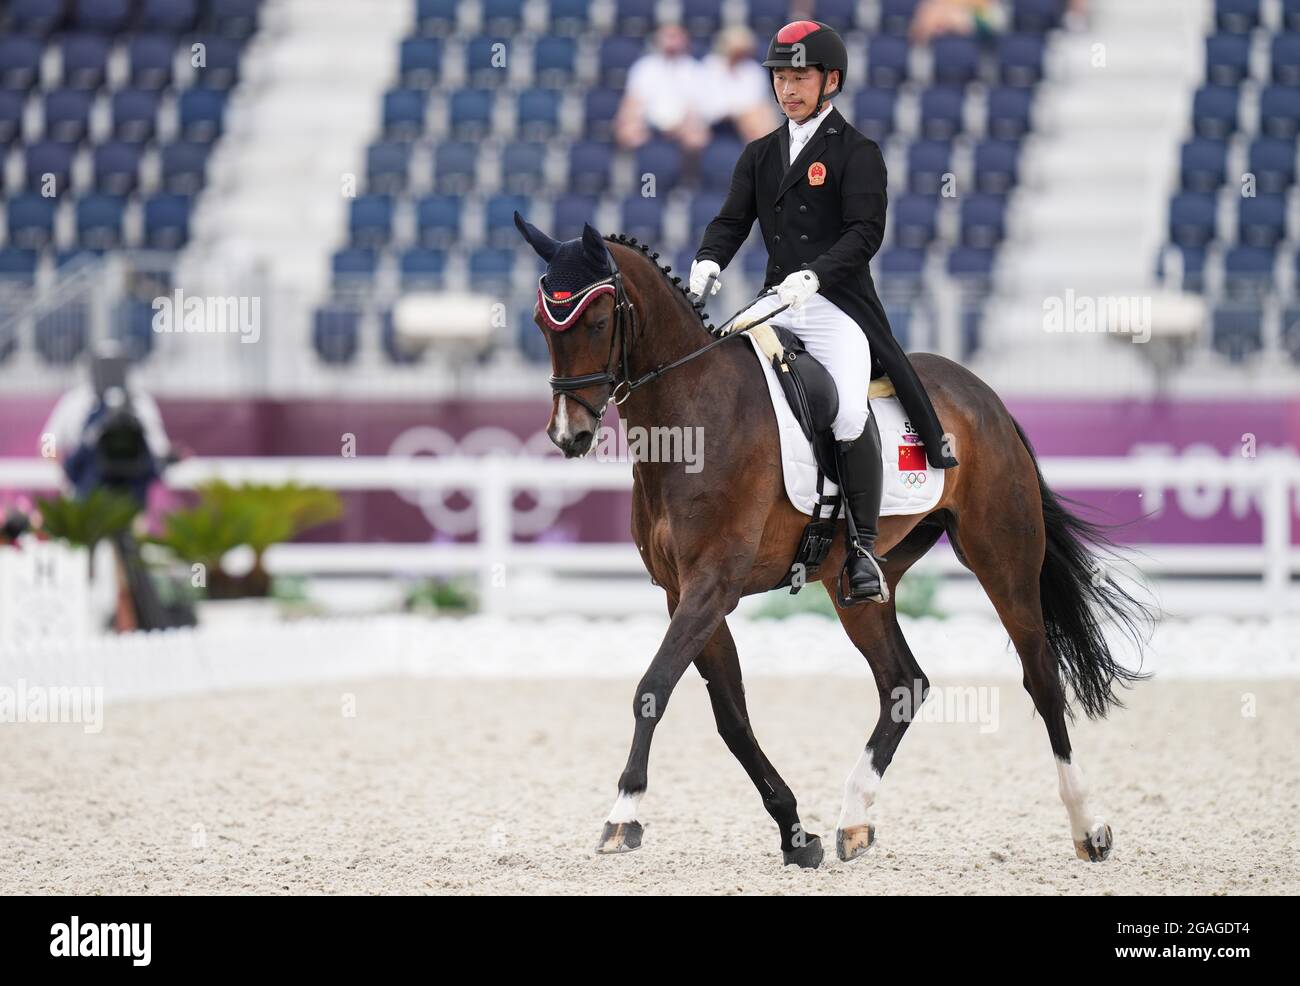 Tokyo, Japan. 31st July, 2021. Bao Yingfeng of China and his horse Flandia 2 perform during the equestrian dressage event at the Tokyo 2020 Olympic Games in Tokyo, Japan, July 31, 2021. Credit: Zhu Zheng/Xinhua/Alamy Live News Stock Photo